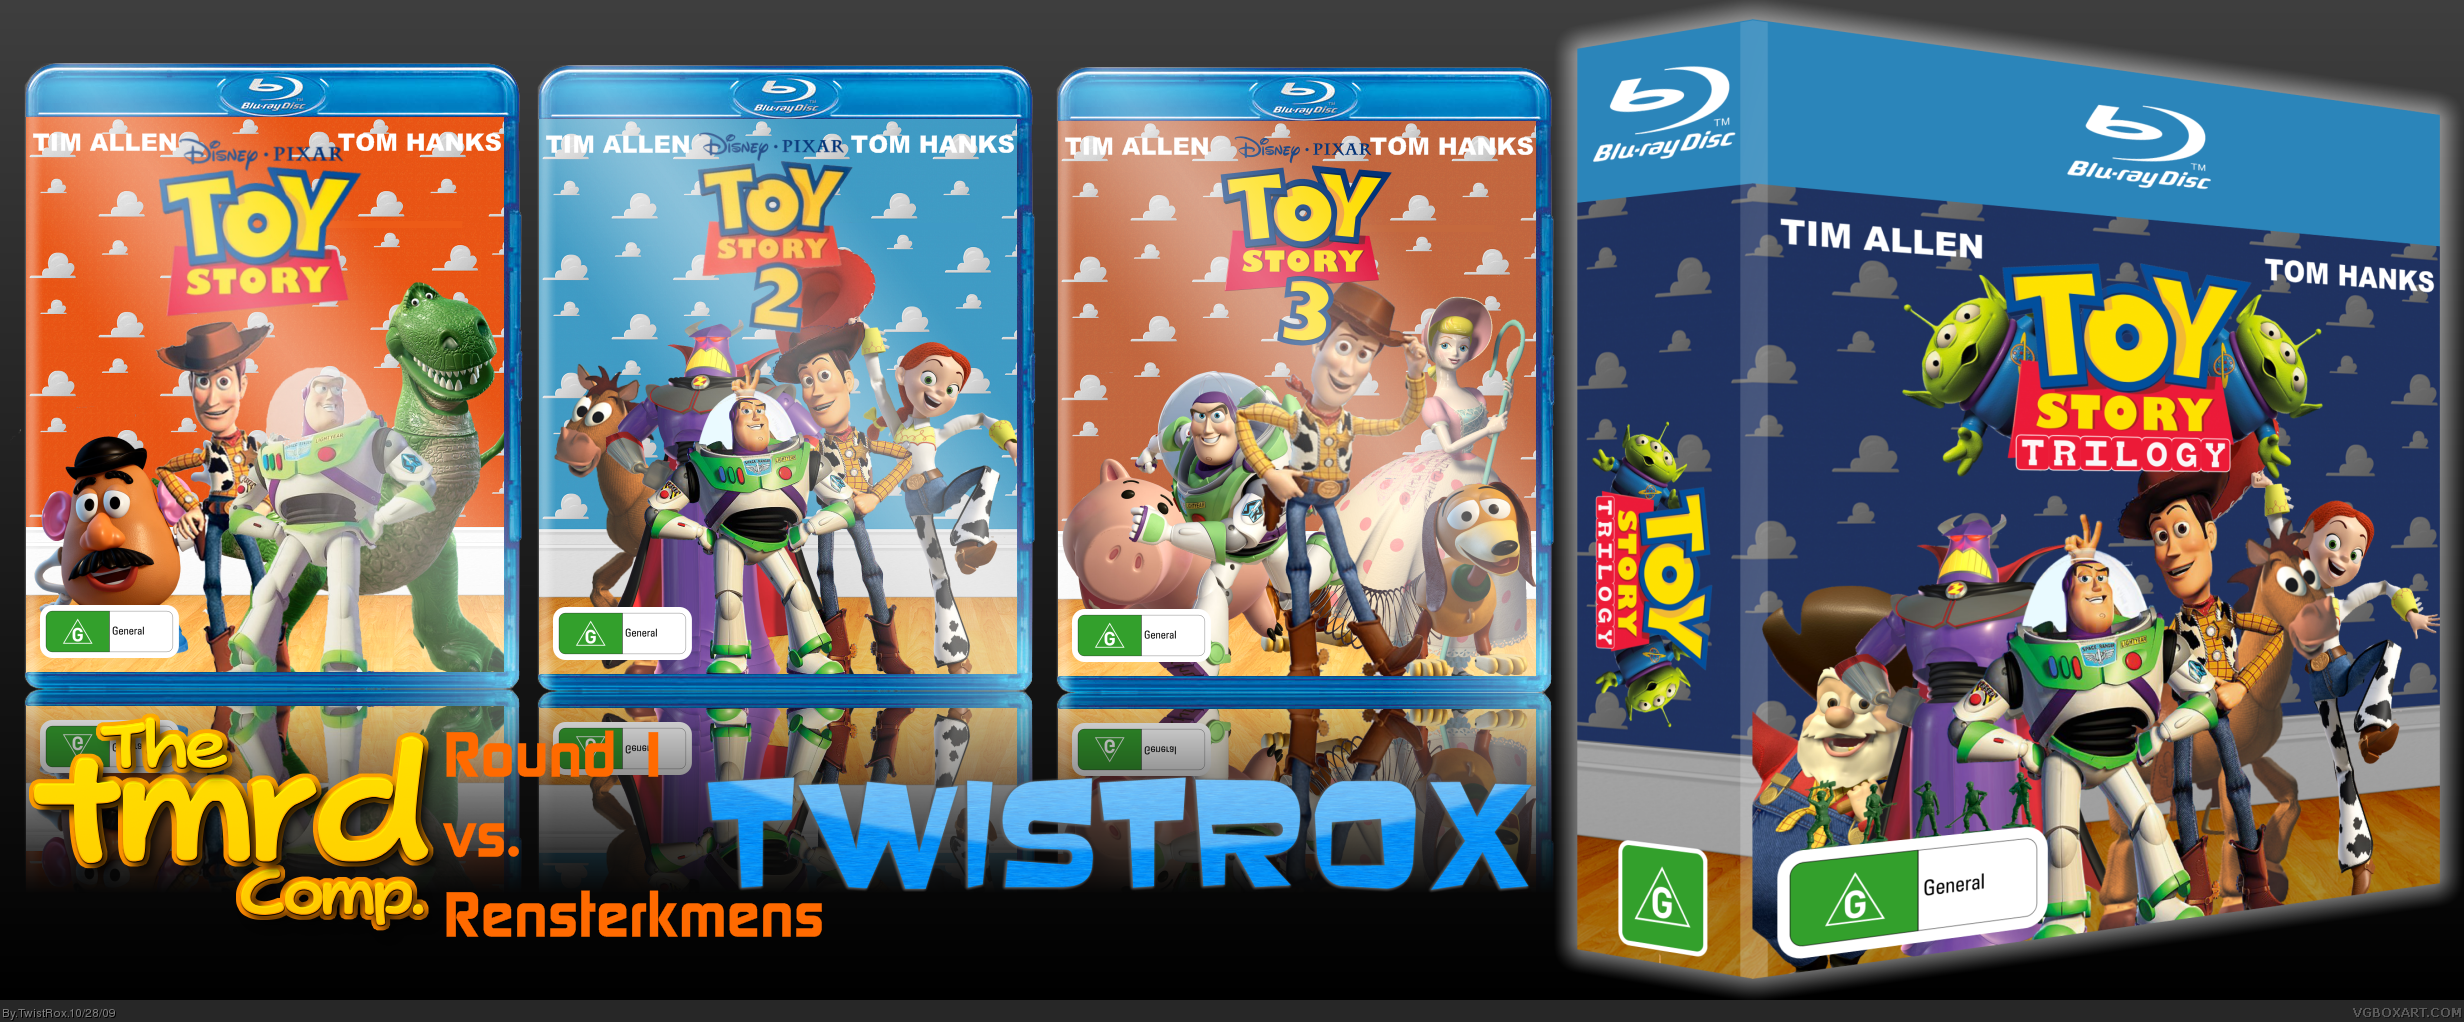 Toy Story Trilogy box cover